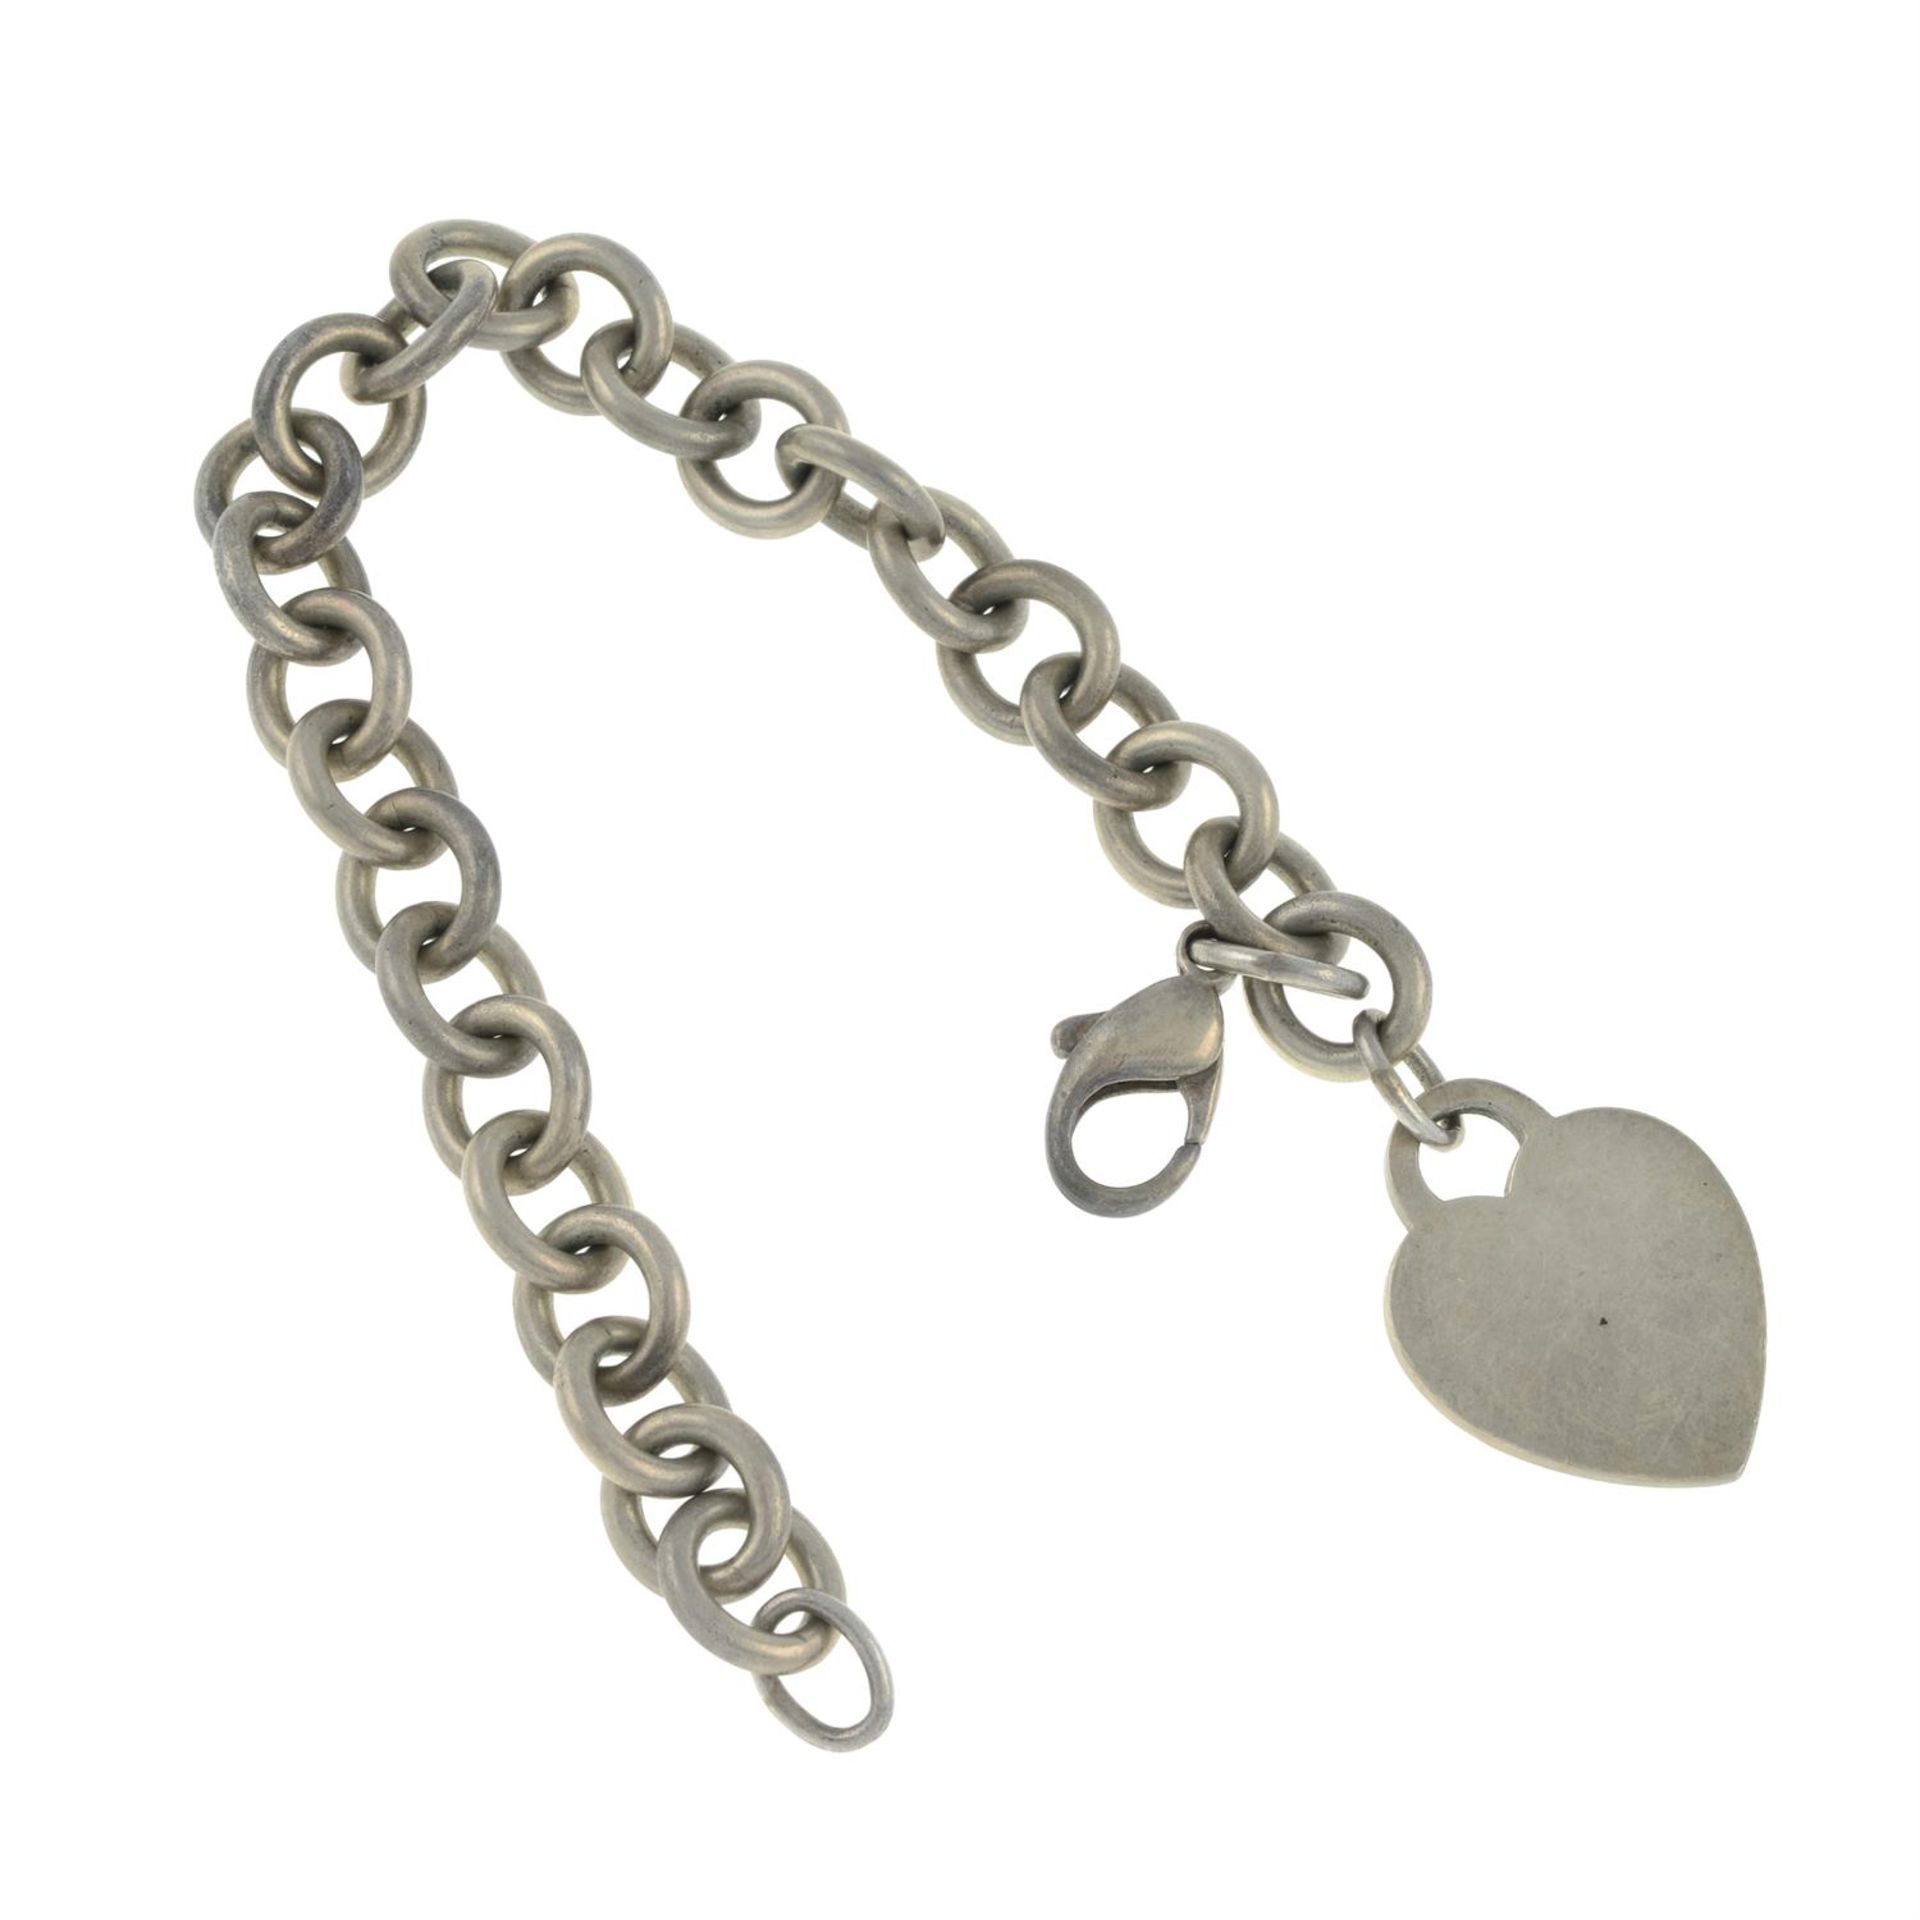 Silver bracelet & heart tag, Tiffany & Co. - Image 2 of 2